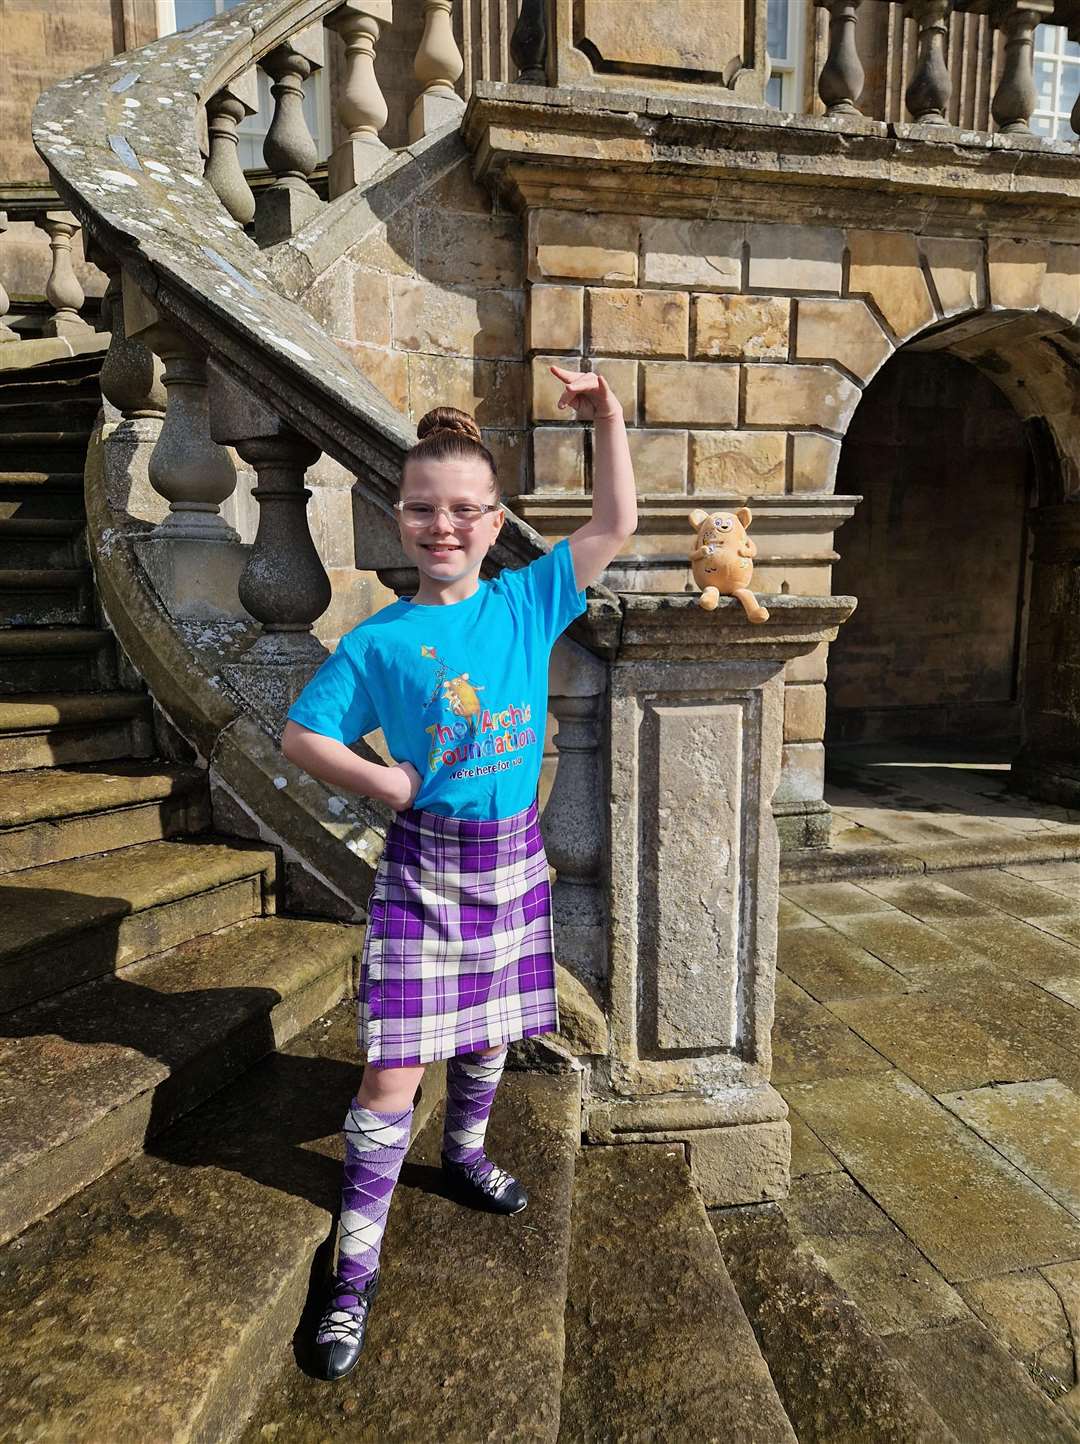 Madison Reid (9) is taking on the Highland dancing fundraising challenge.